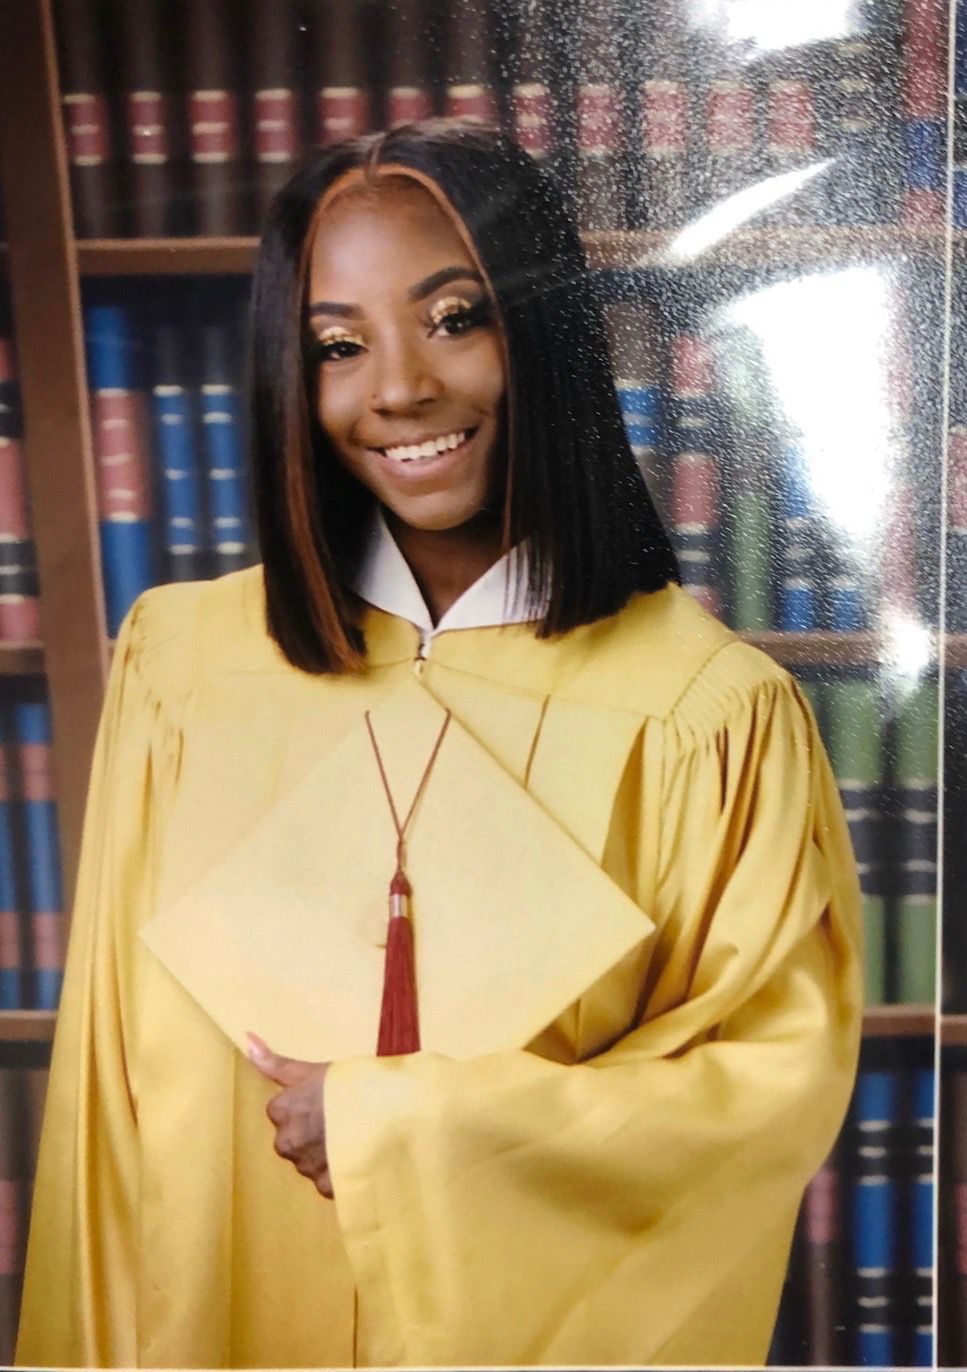 Dnigma Howard, 18, graduated on May 20 from Innovations High School, a Chicago Public Schools charter. She plans to attend Malcolm X College in the fall to pursue an Associate’s degree in business.